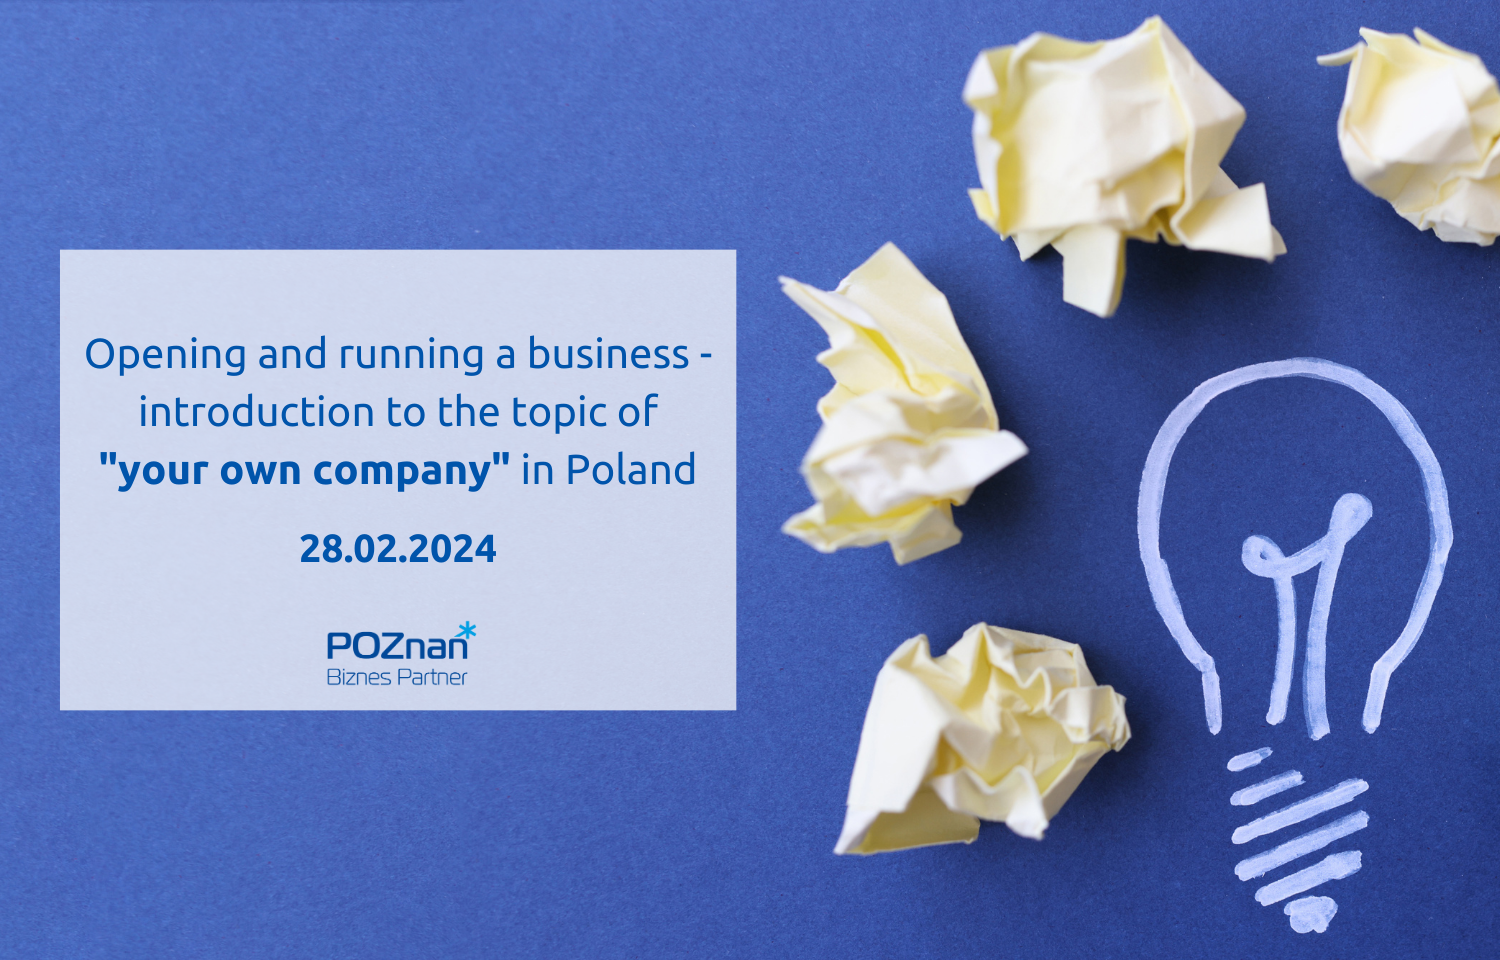 Opening and running a business - introduction to the topic of your own company in Poland (2).png (2,06 MB)